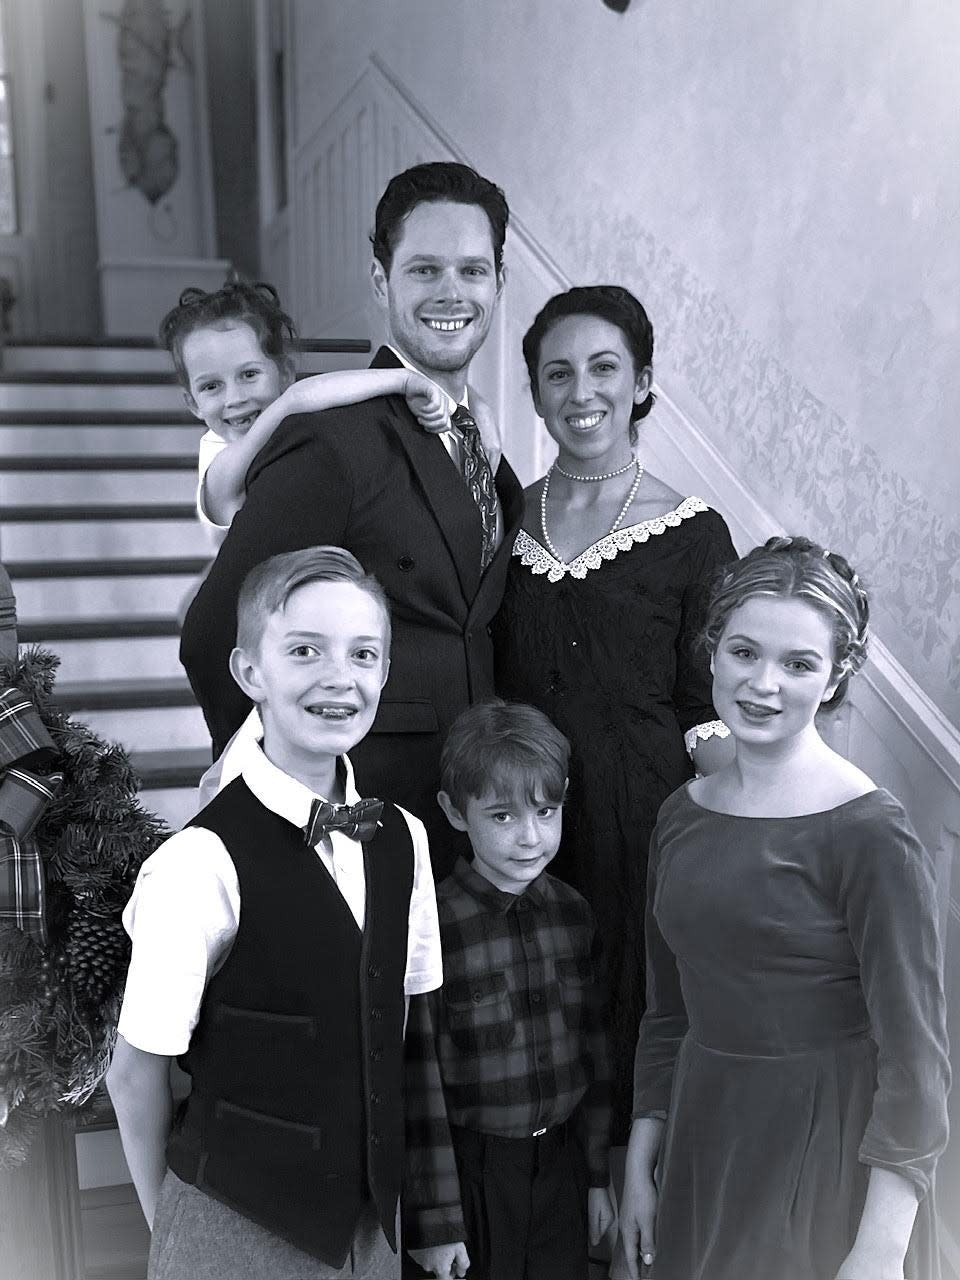 The Baileys sing their story in "It's A Wonderful Life -- the Musical." Bottom, l to r, are Beckham Peterson as Pete, PJ Berube as Tommy, Merritt Willcox as Janie. Standing are Paul RIchardson as George, Meghan Richardson as Mary and Millie Richardson as baby Zuzu.